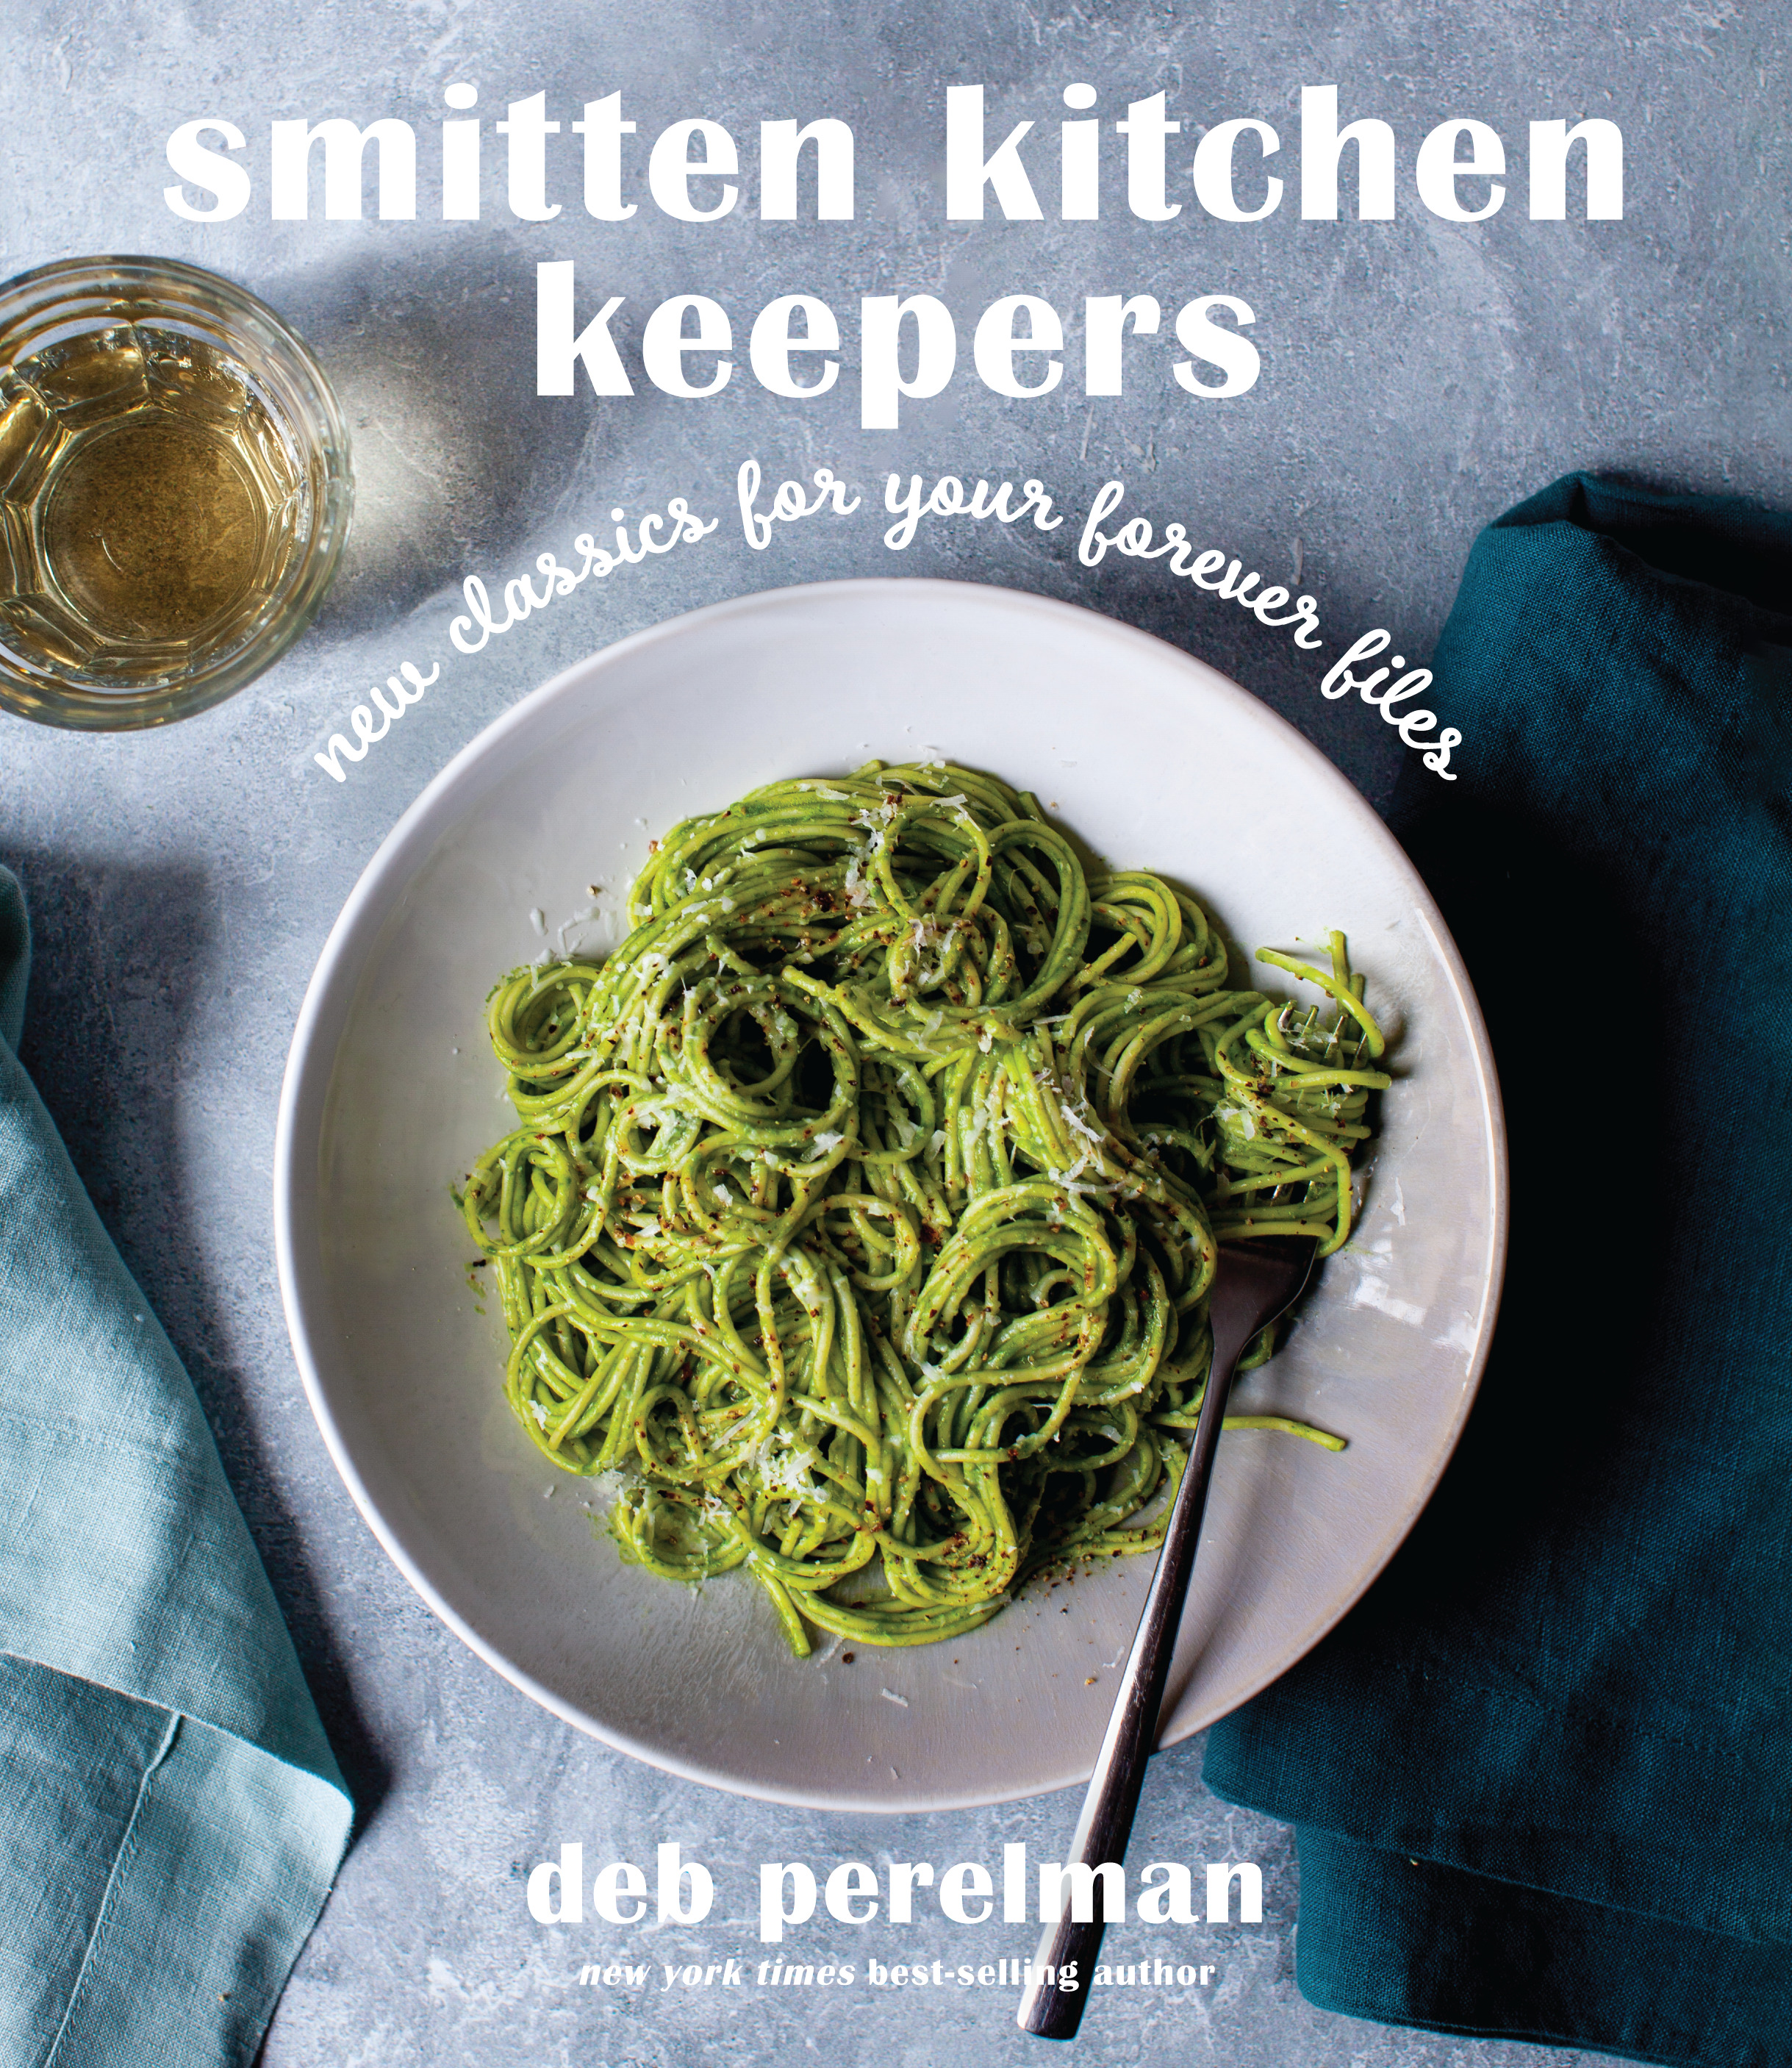 NEW DATE Dec 19th: In-Person Event with Deb Perelman/Smitten Kitchen Keepers